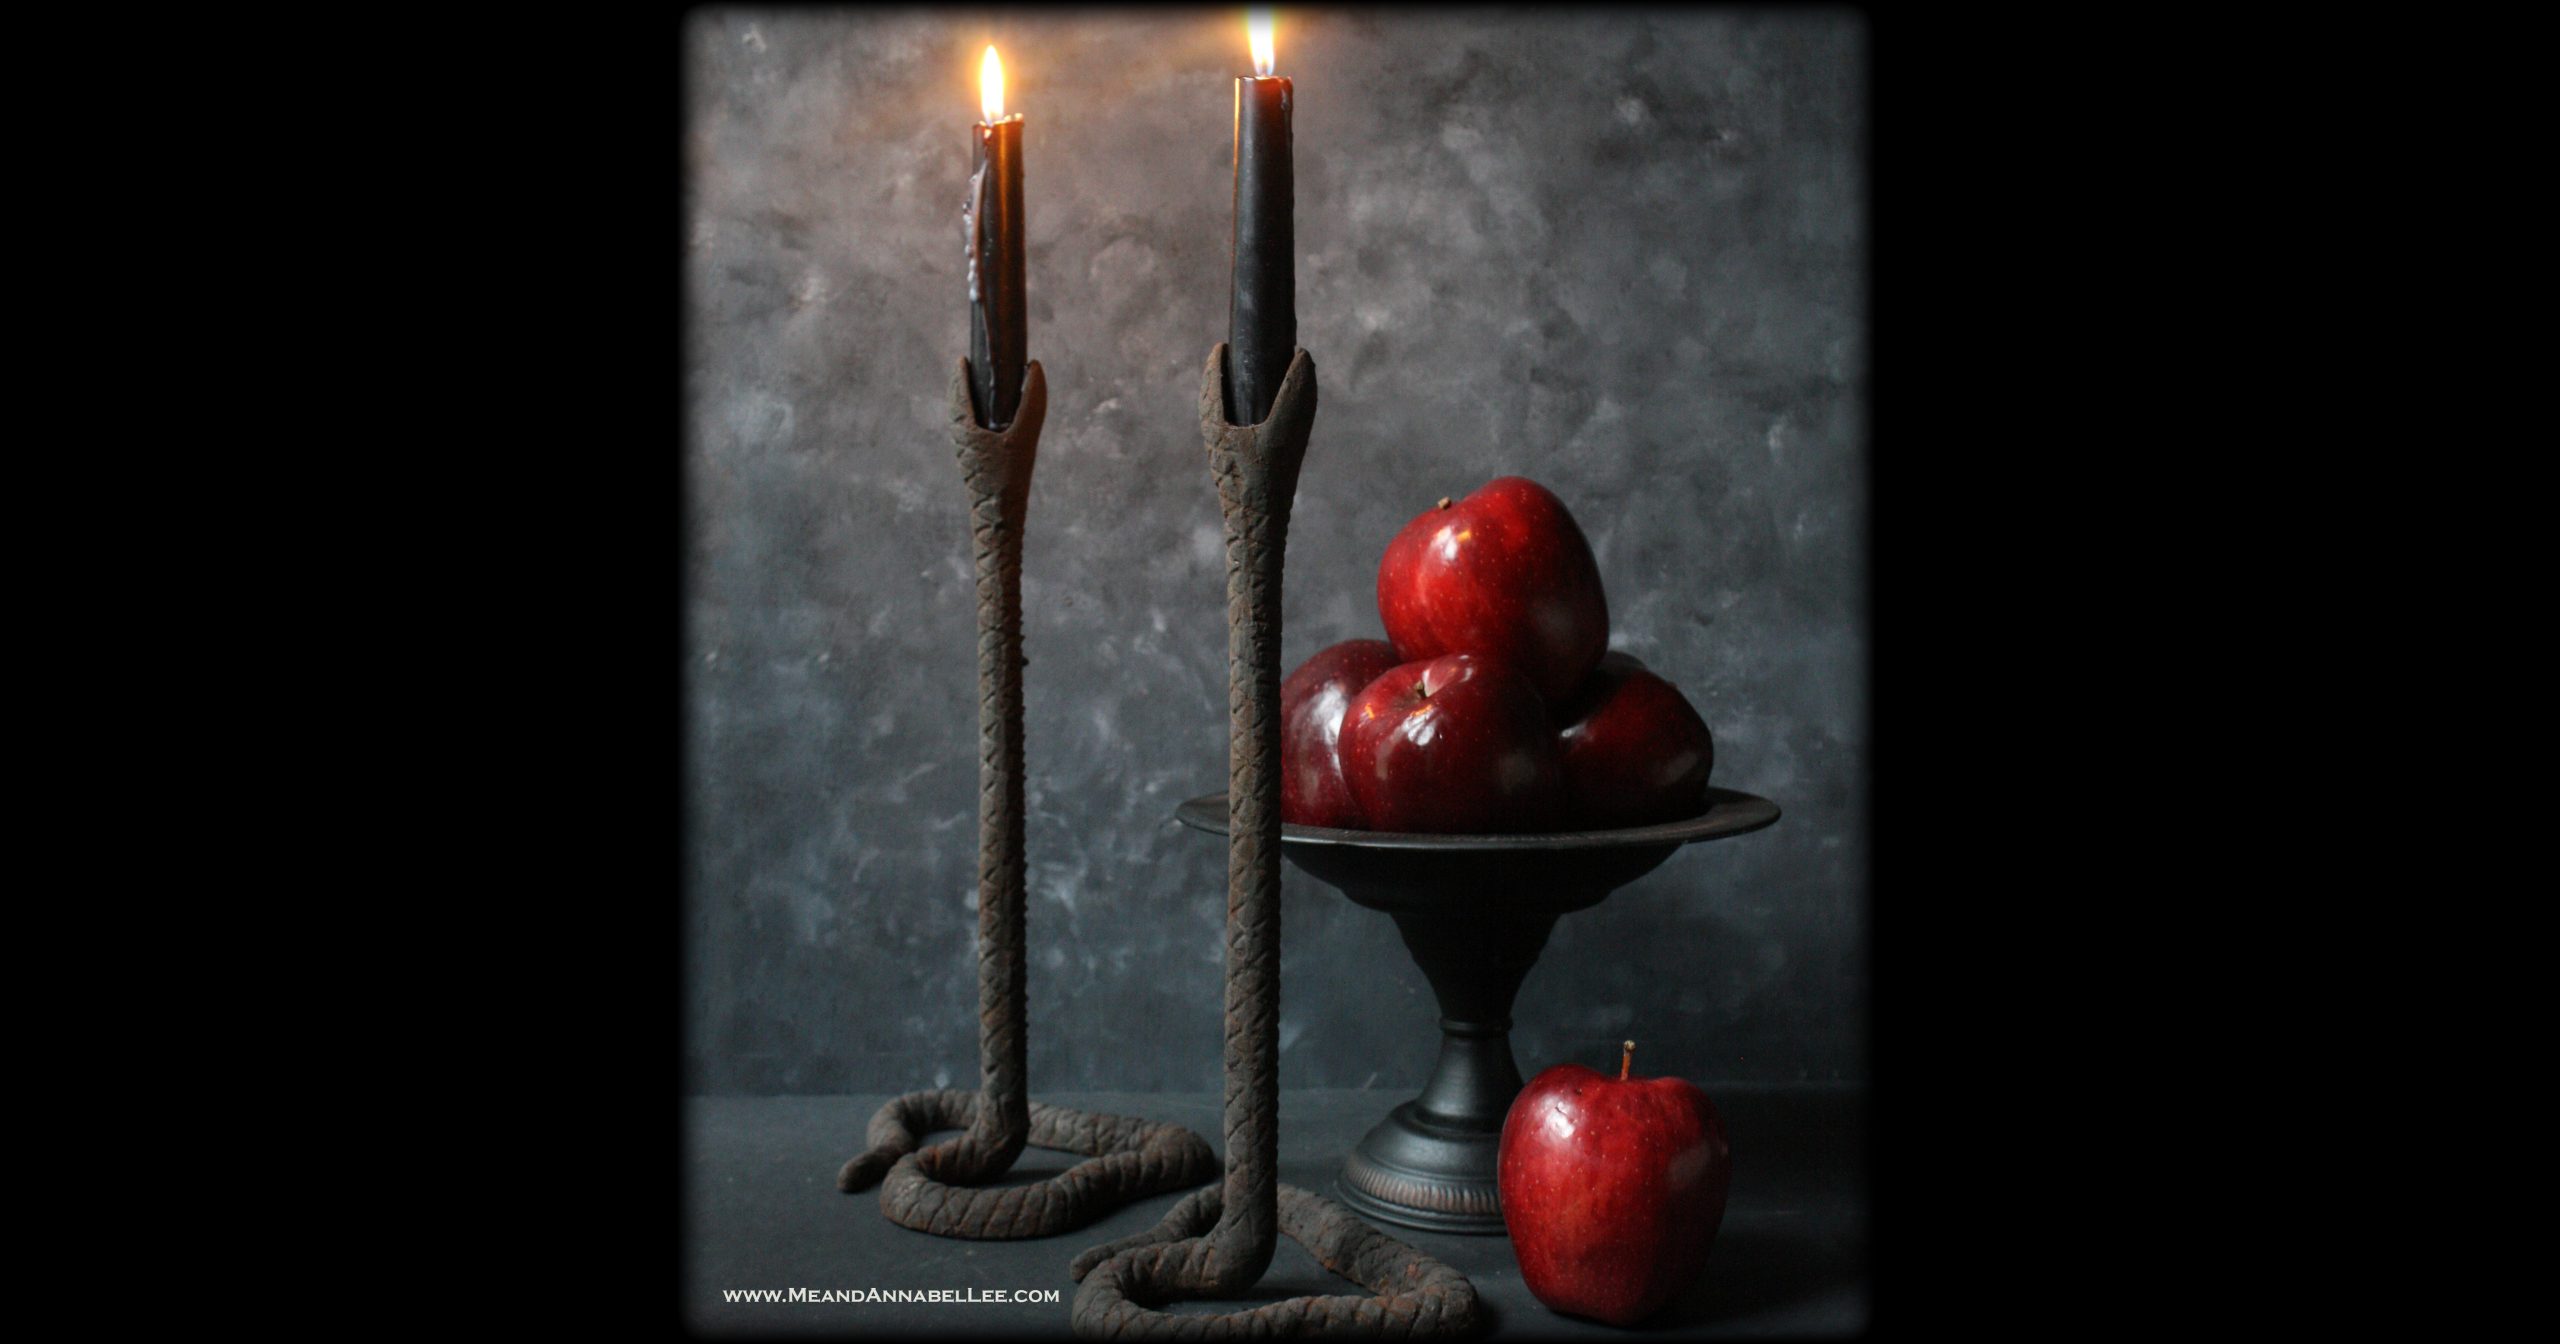 Gothic Antique Snake Candle Holders | Transform Halloween Decorations into something sophisticated you can use all year long by adding a rusted antique finish | Art Deco to Gothic Decor | Serpent Candlesticks| Curiosities | Poison Apple | Halloween Décor | Me and Annabel Lee Blog